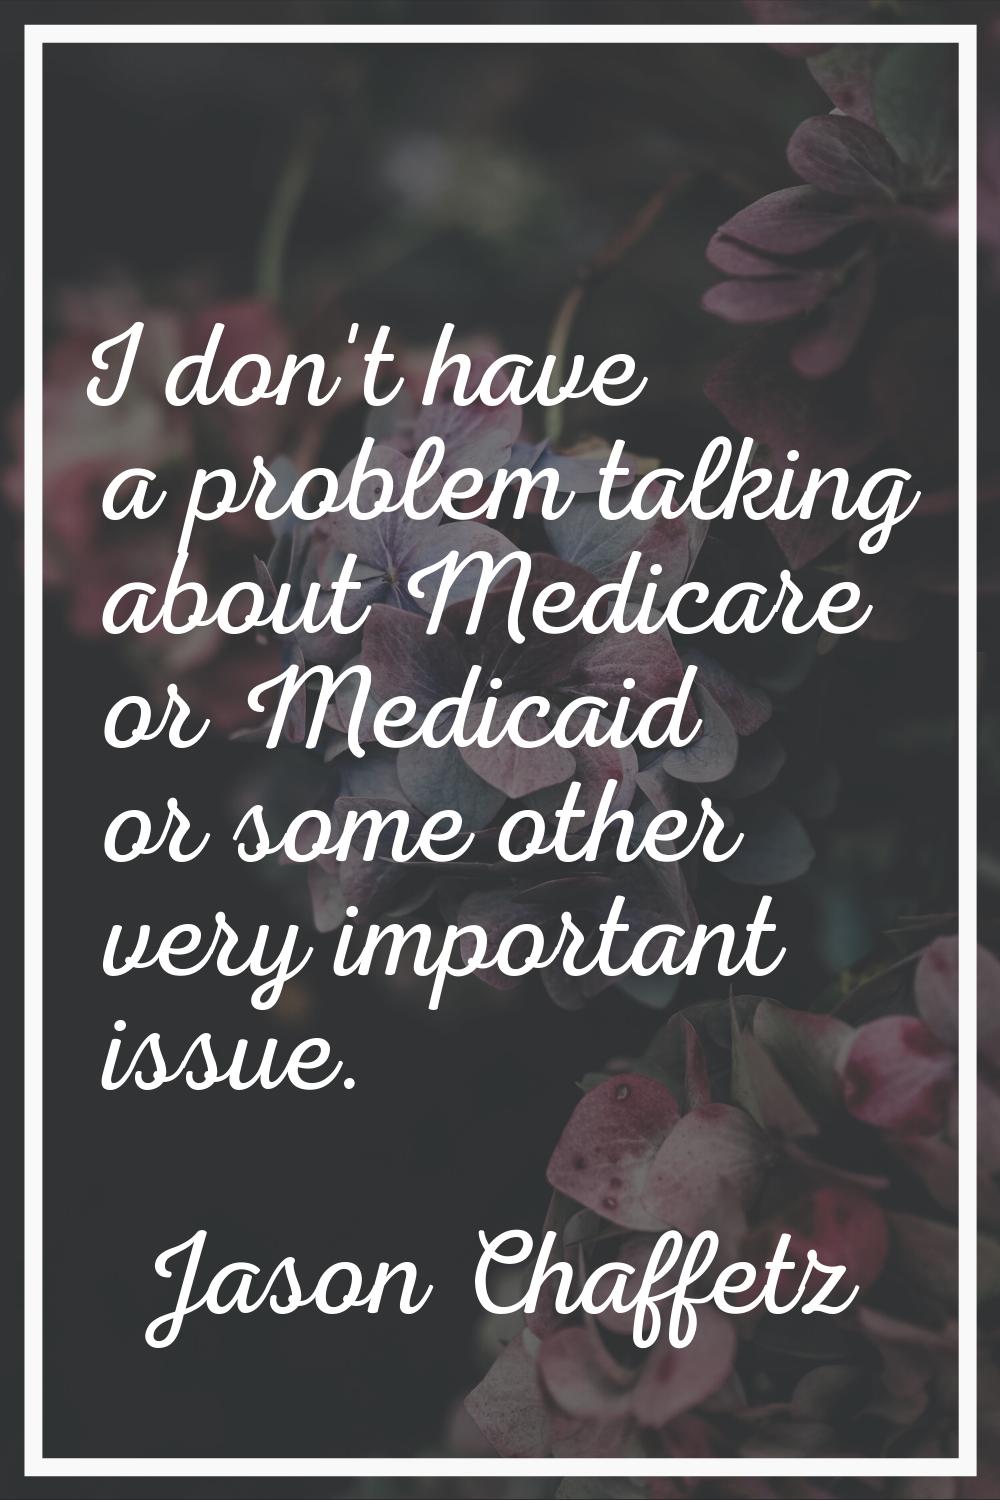 I don't have a problem talking about Medicare or Medicaid or some other very important issue.